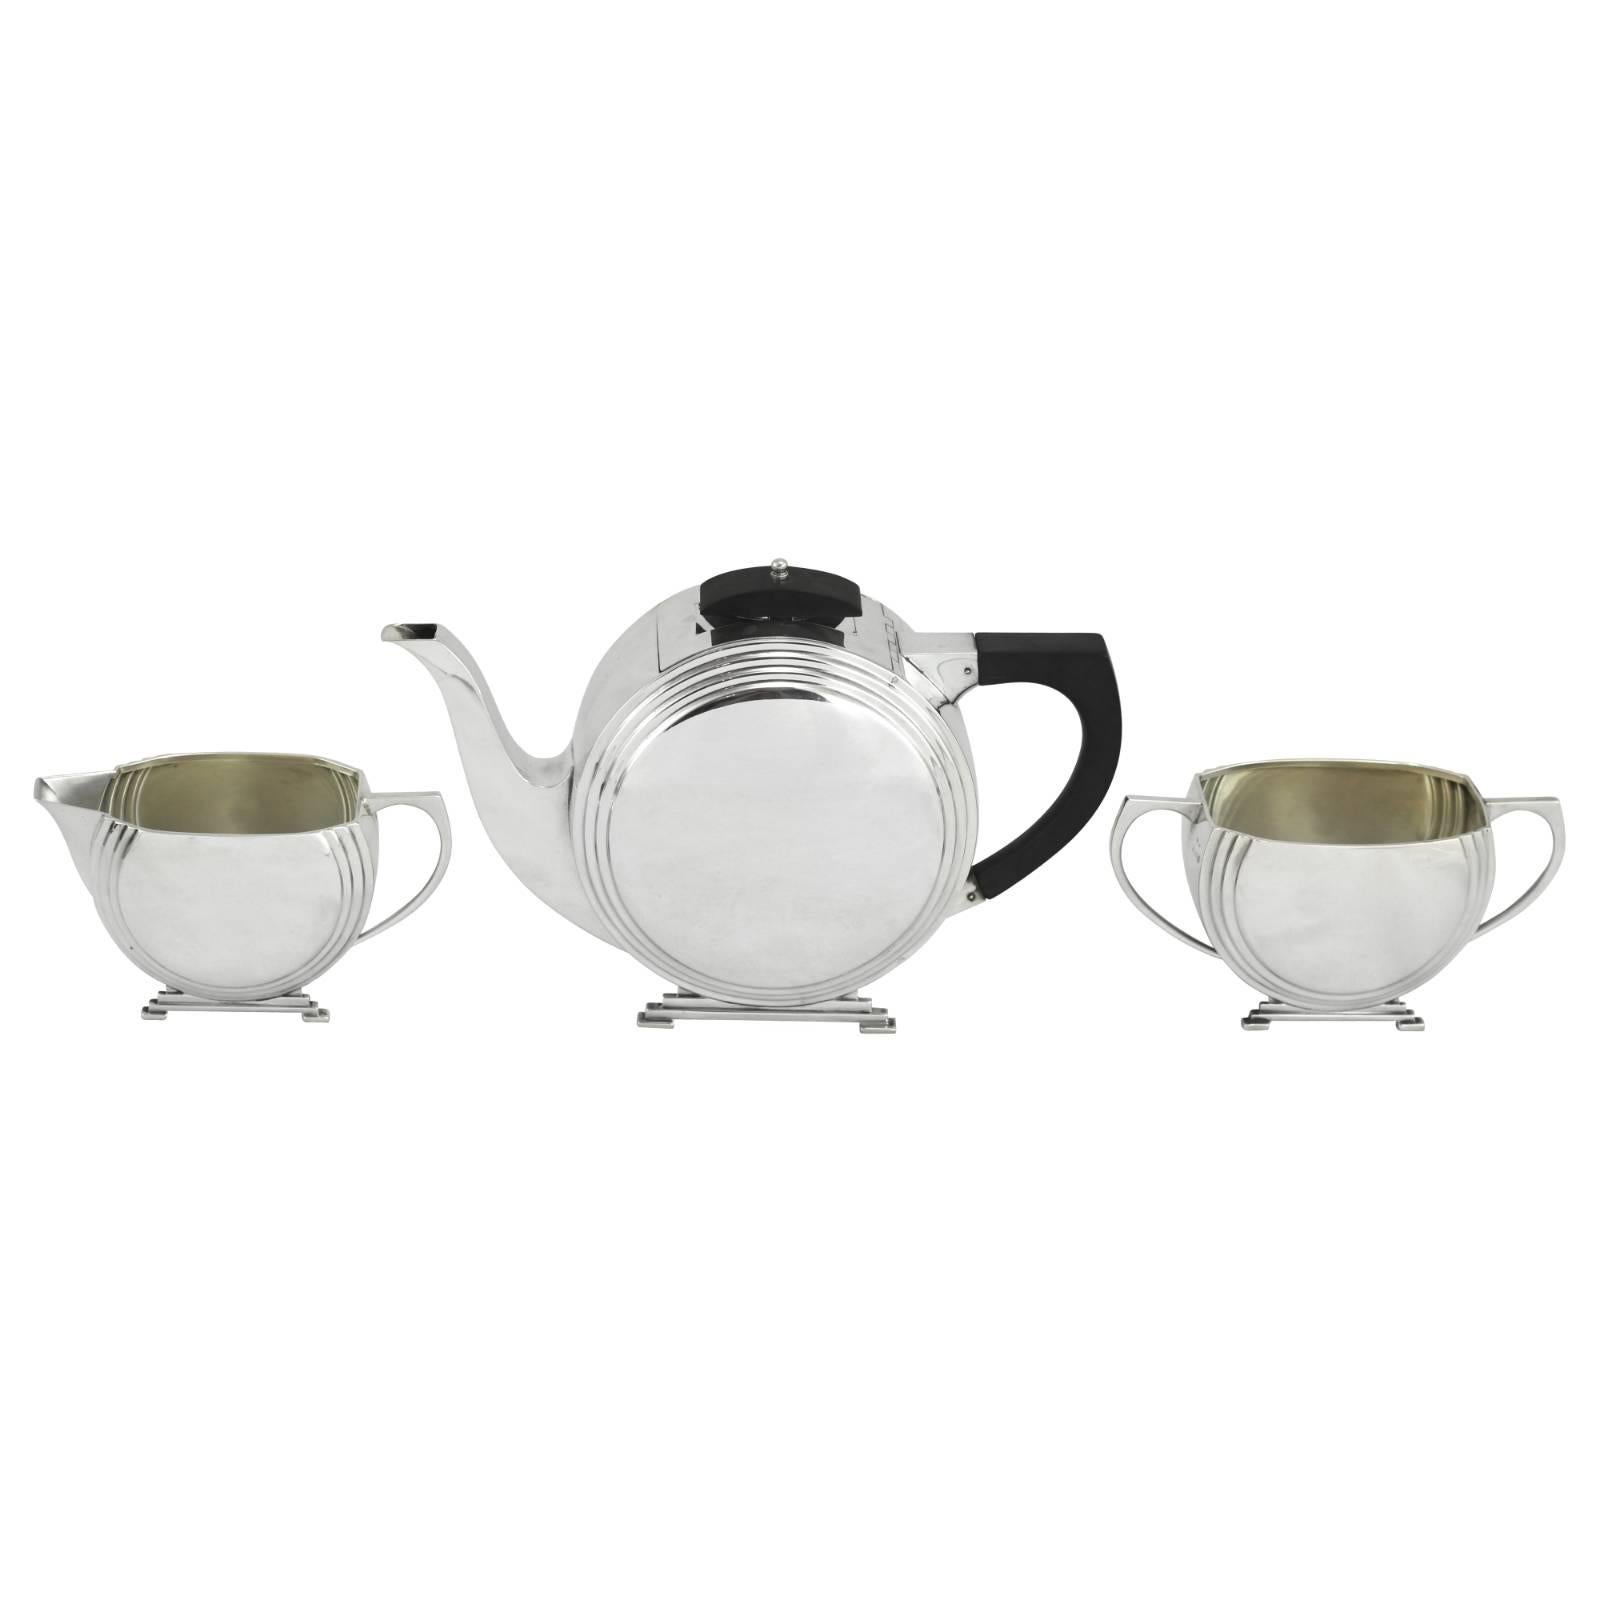 An early 20th century Art Deco sterling silver tea set by Joseph Gloster Ltd of Birmingham. This three-piece tea set displays Classic Art Deco design features, such as bold lines, symmetry, and contrasting elements of silver and ebony.